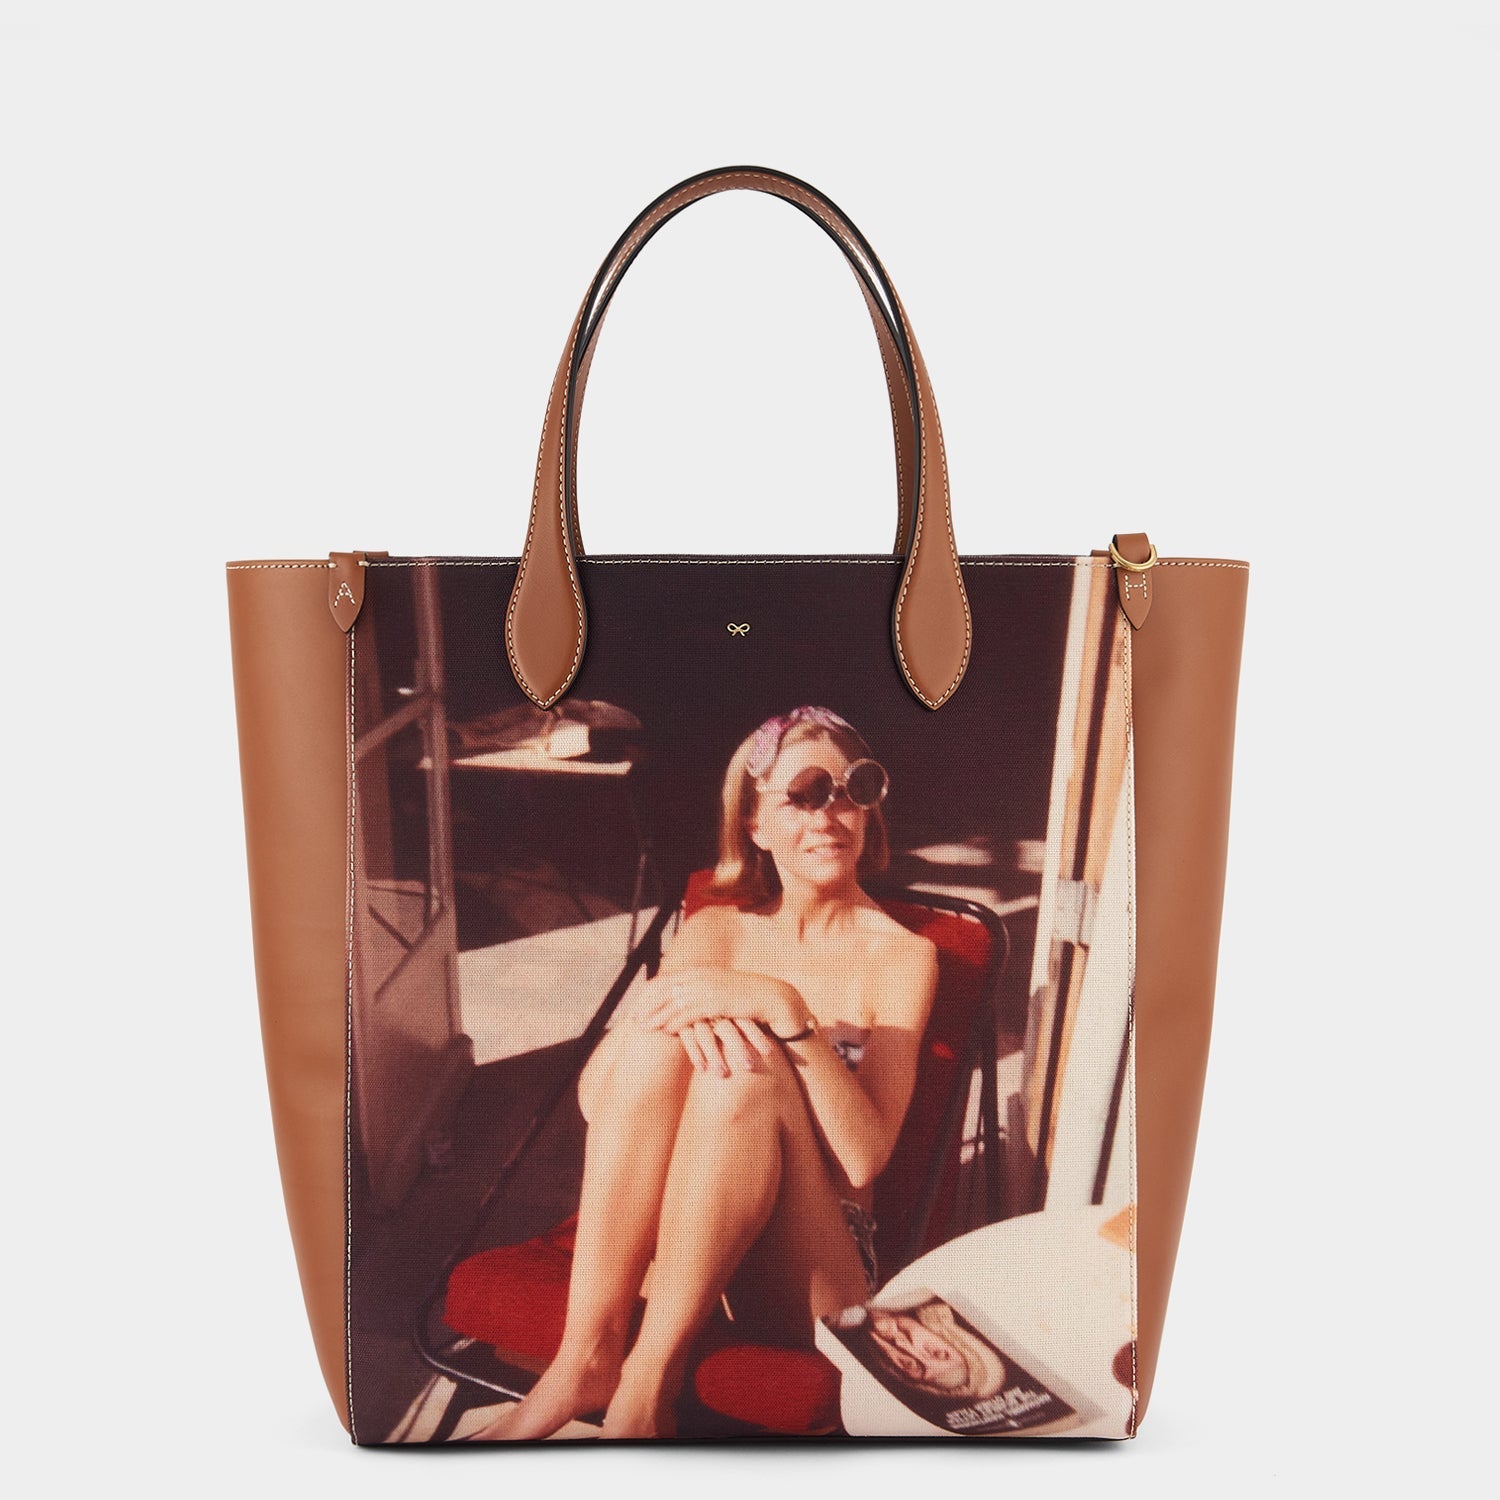 Be A Bag N/S Tote -

                  
                    Recyled Canvas in Tan -
                  

                  Anya Hindmarch US
